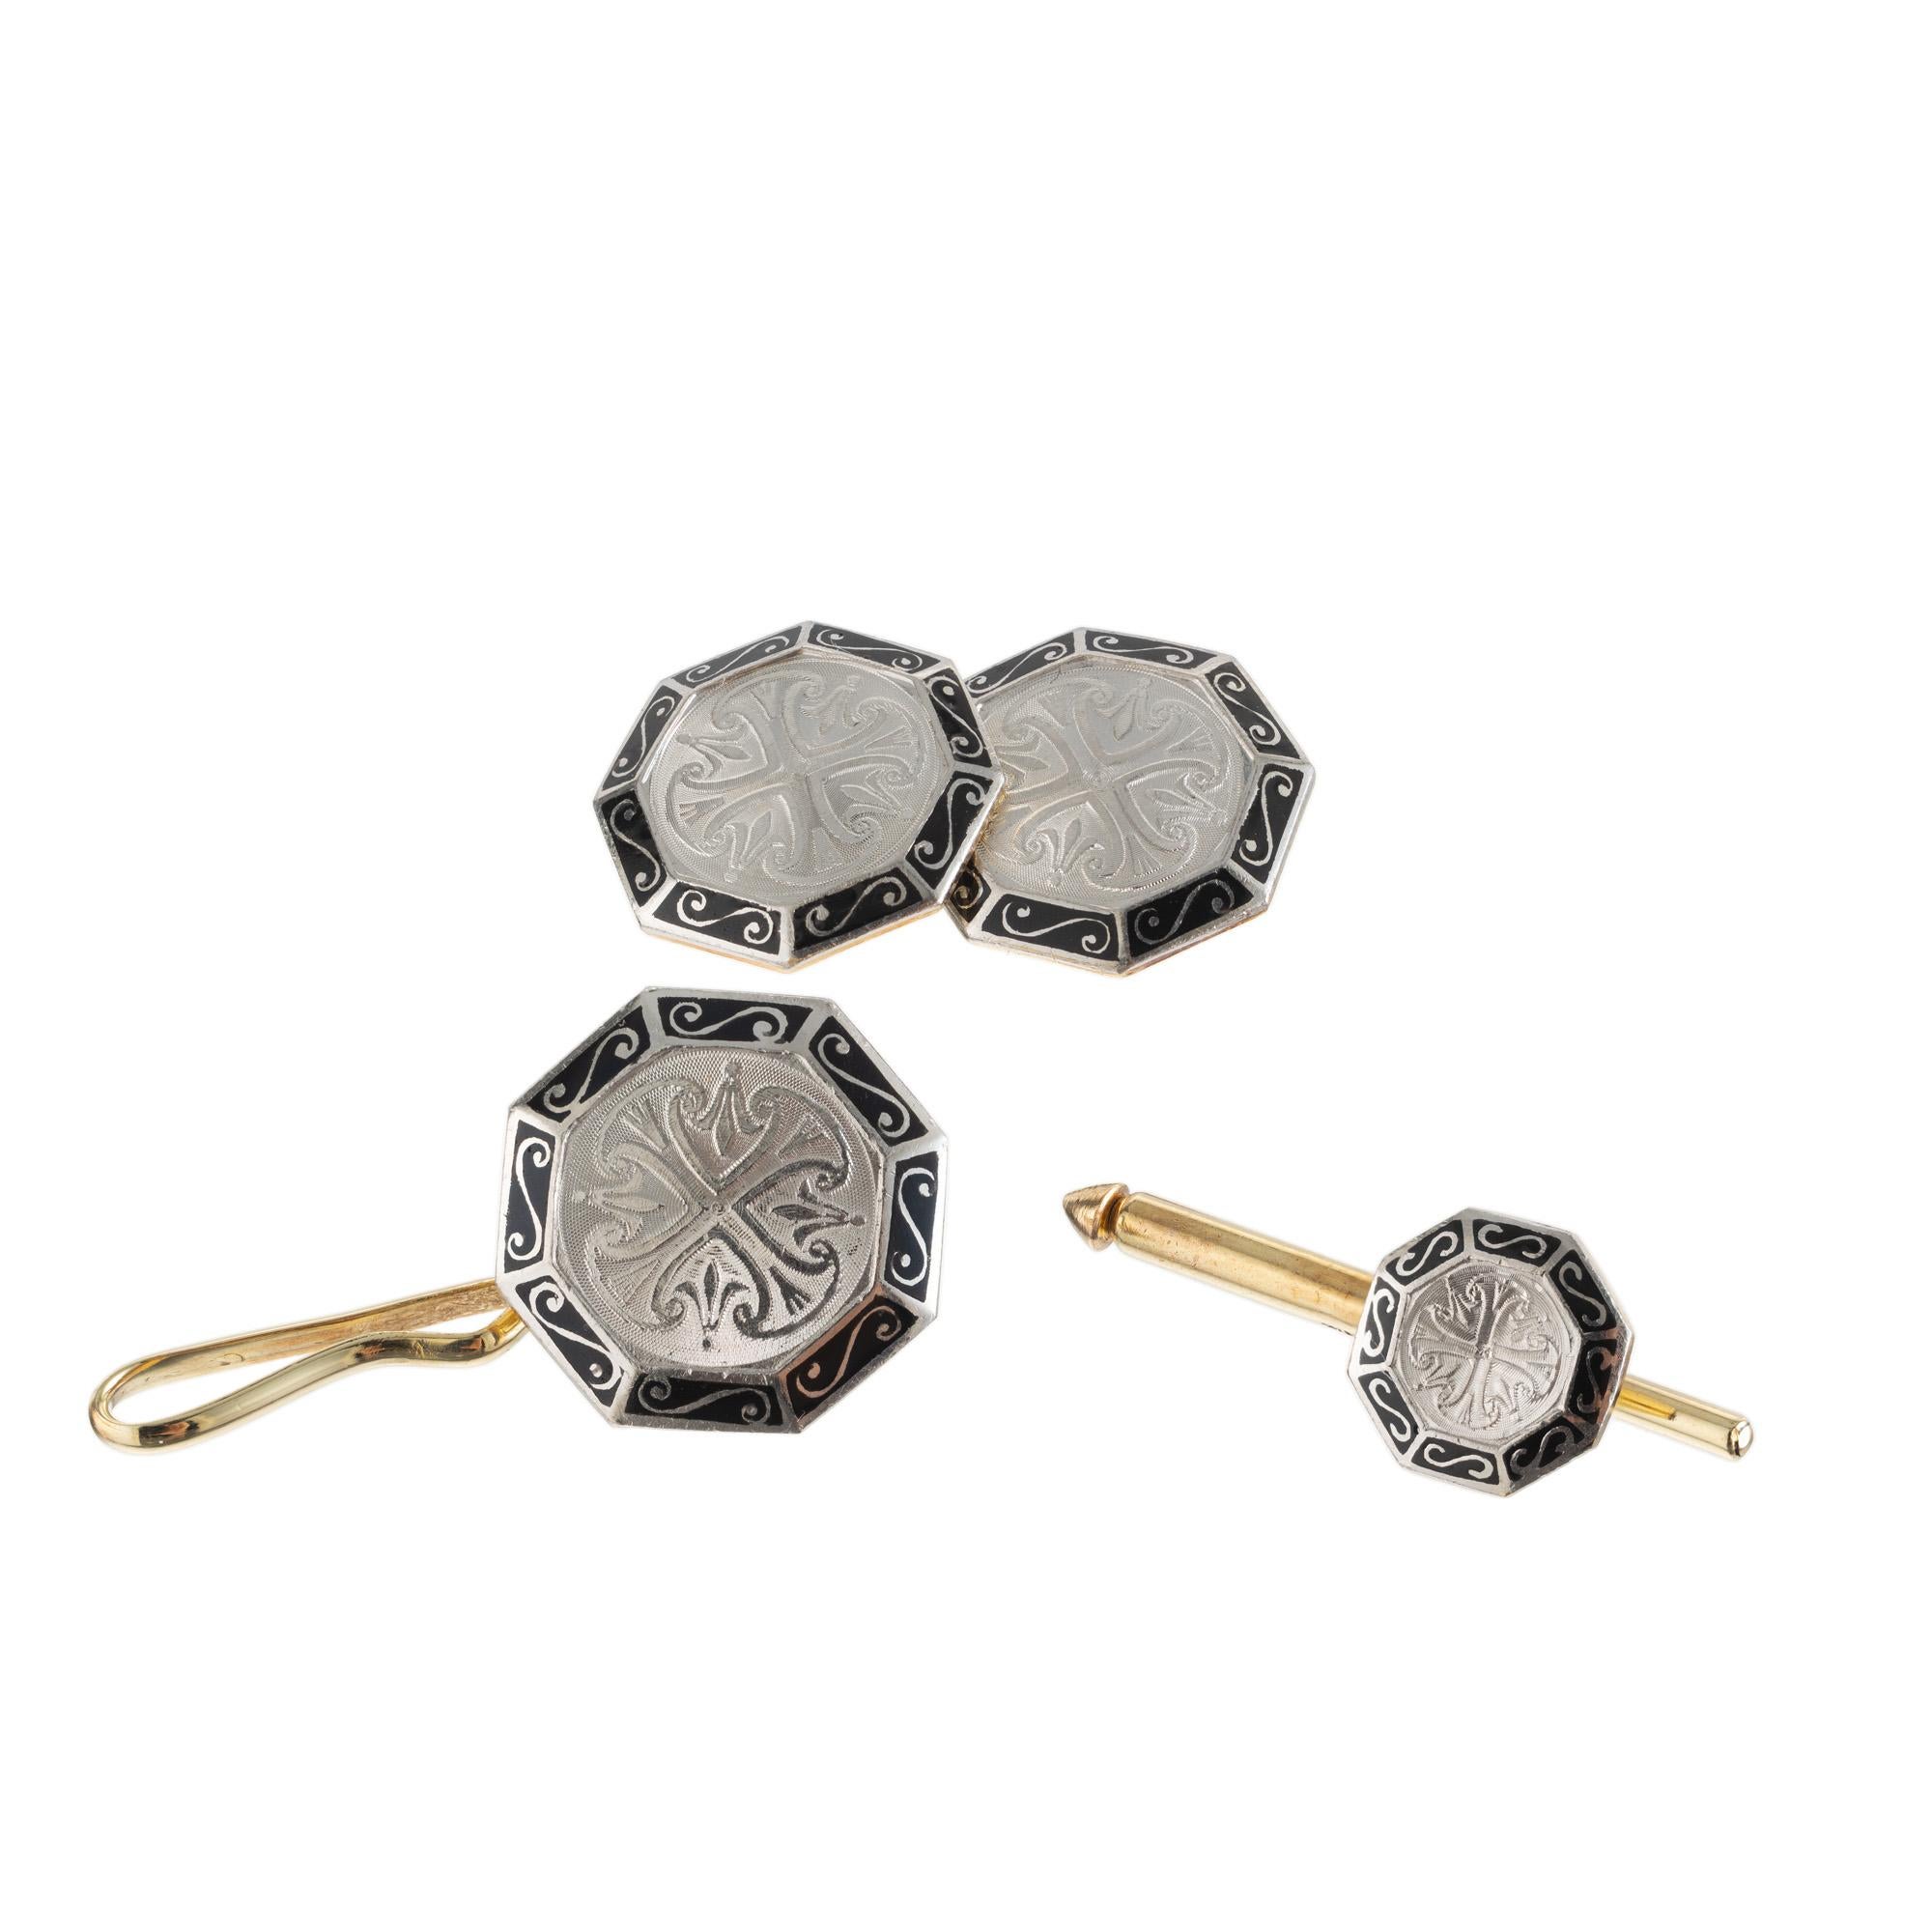 1930's vintage men's cufflinks dress set. These cufflinks and dress set begin with platinum detailed tops which are engraved with a Templar cross design and haloed with black enamel. The rest of the set is made of 14k yellow gold. 

2 double sided